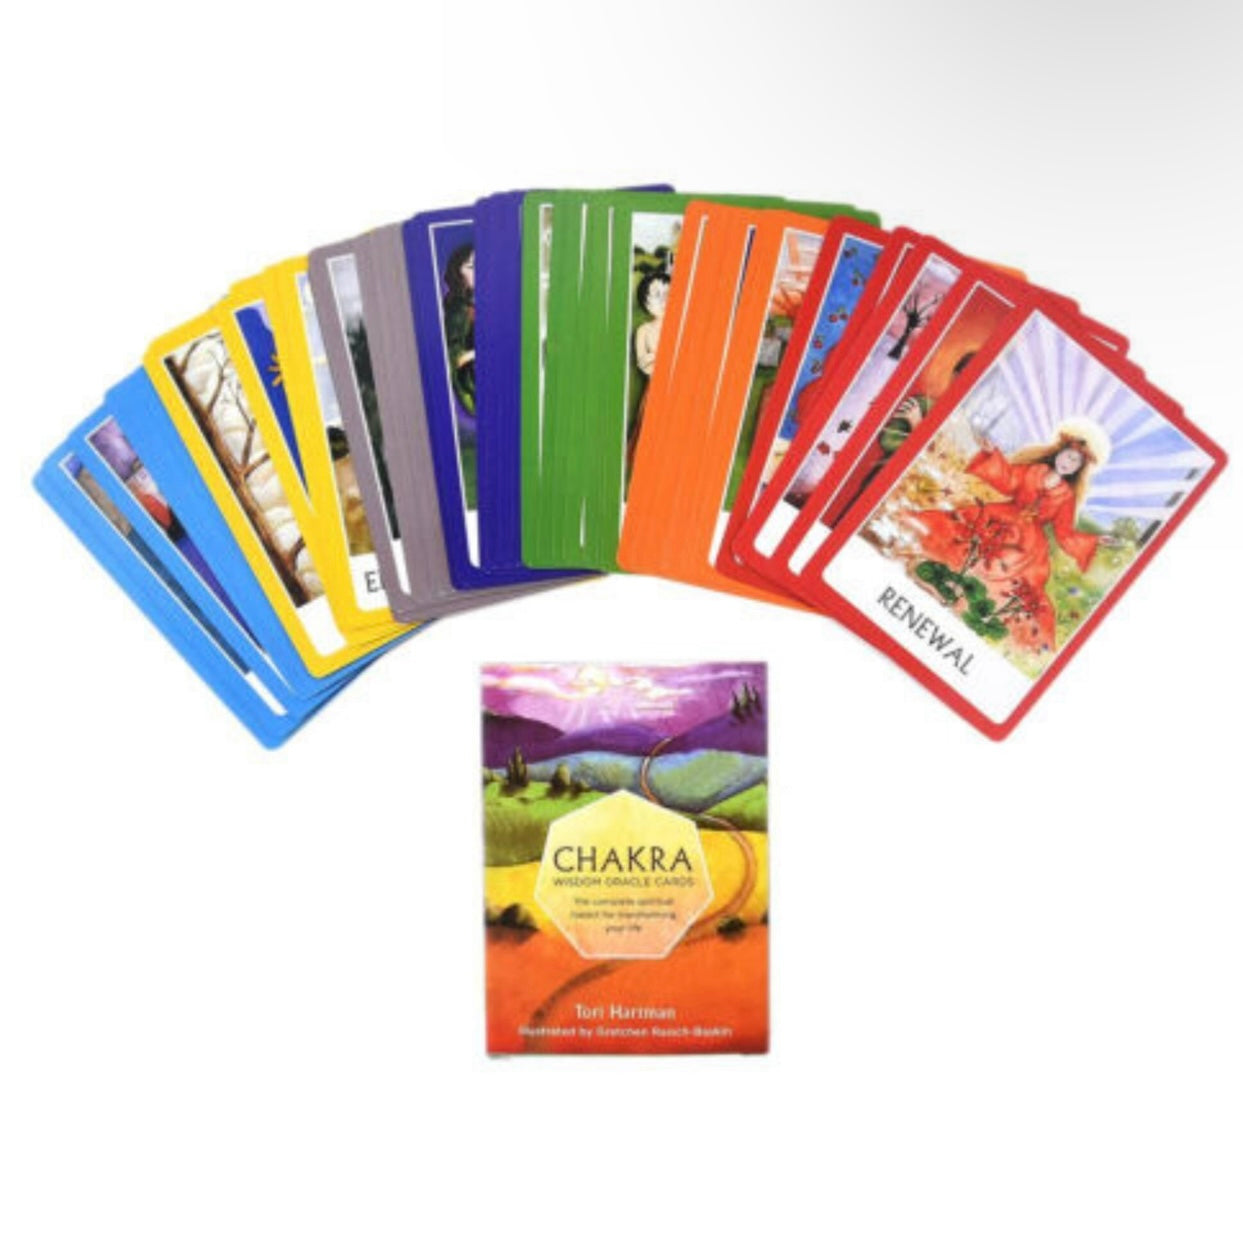 Chakra Wisdom Oracle Cards - 49 cards